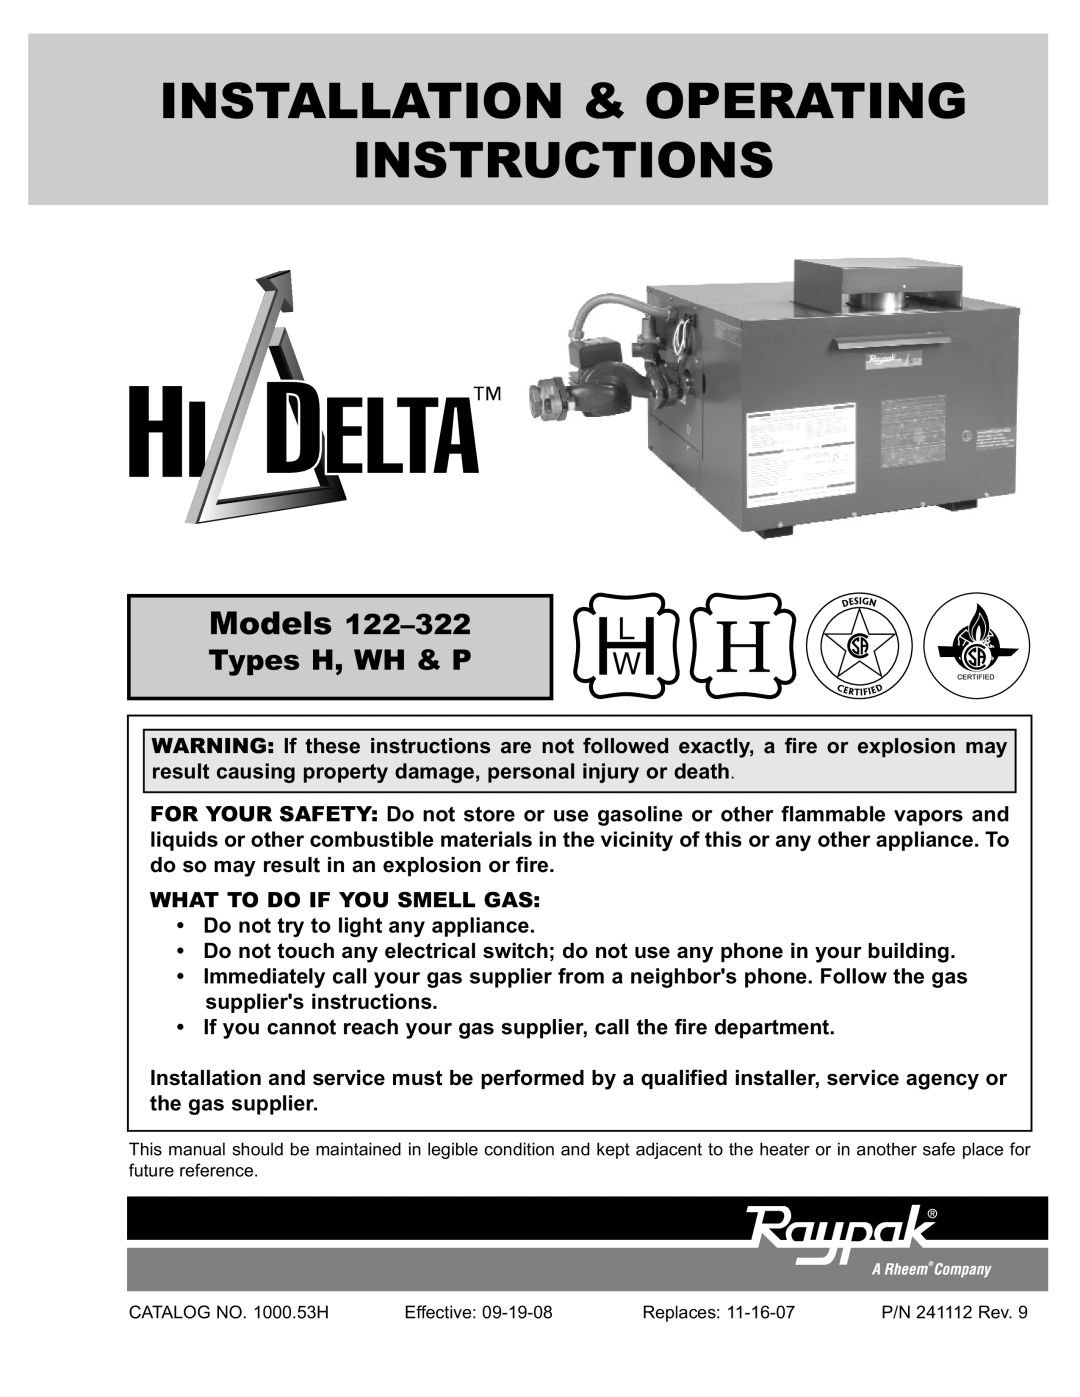 Raypak 122-322 installation instructions Models Type H, WH, & P, Foryoursafety, Operating And Installation Instructions 